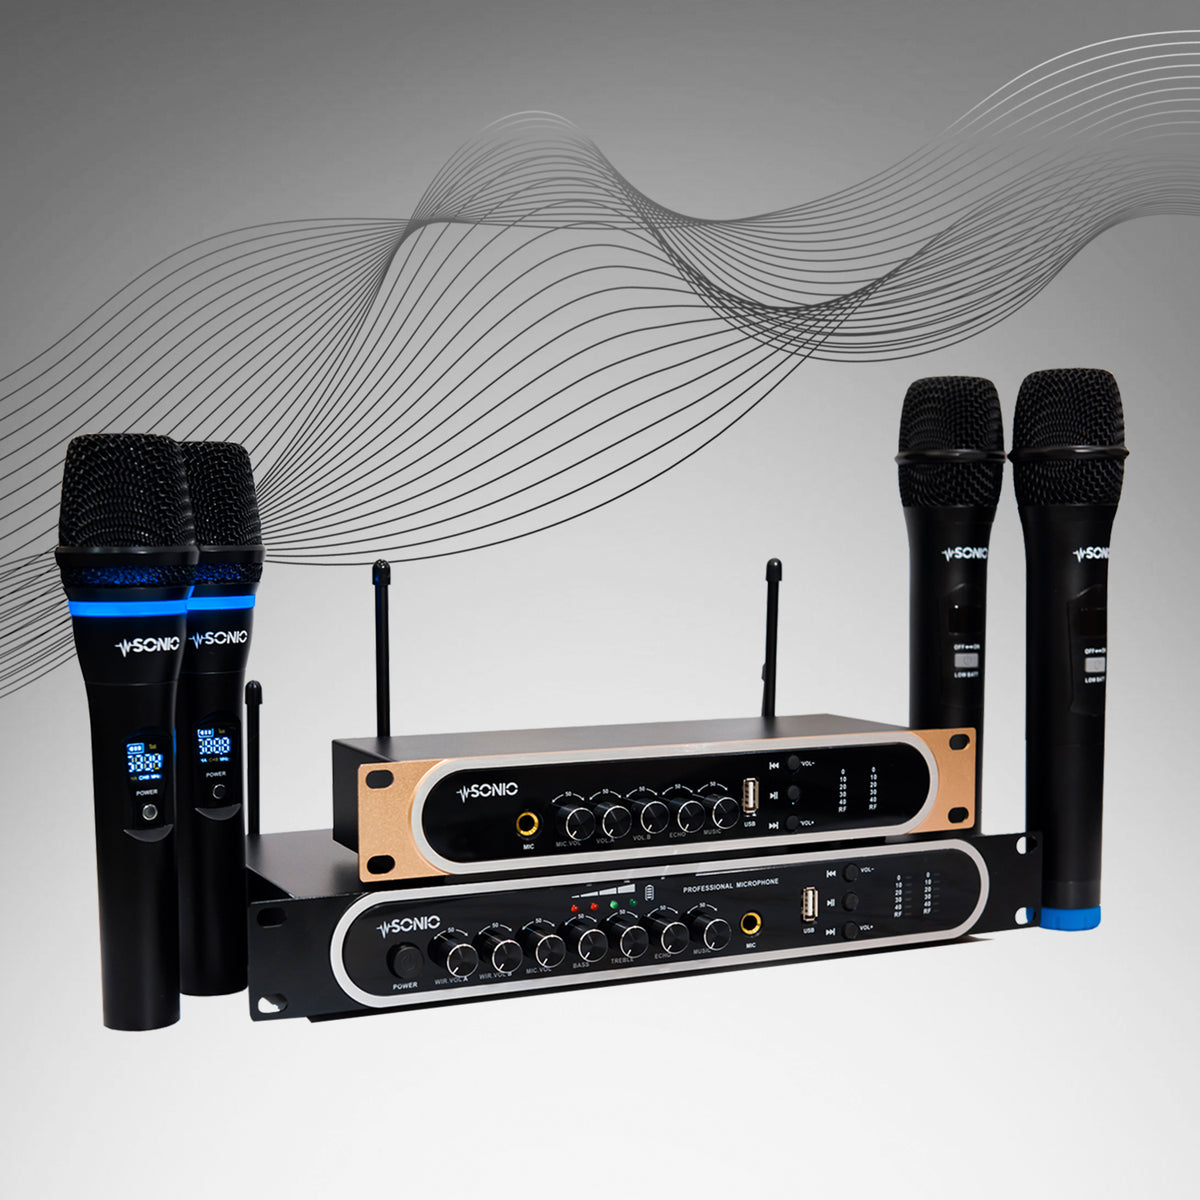 At SONIO, we know that the right gear can make a performance   We’ve developed our Wireless Microphone System to connect to your sound system. You can count on it to help you deliver your best vocal performance